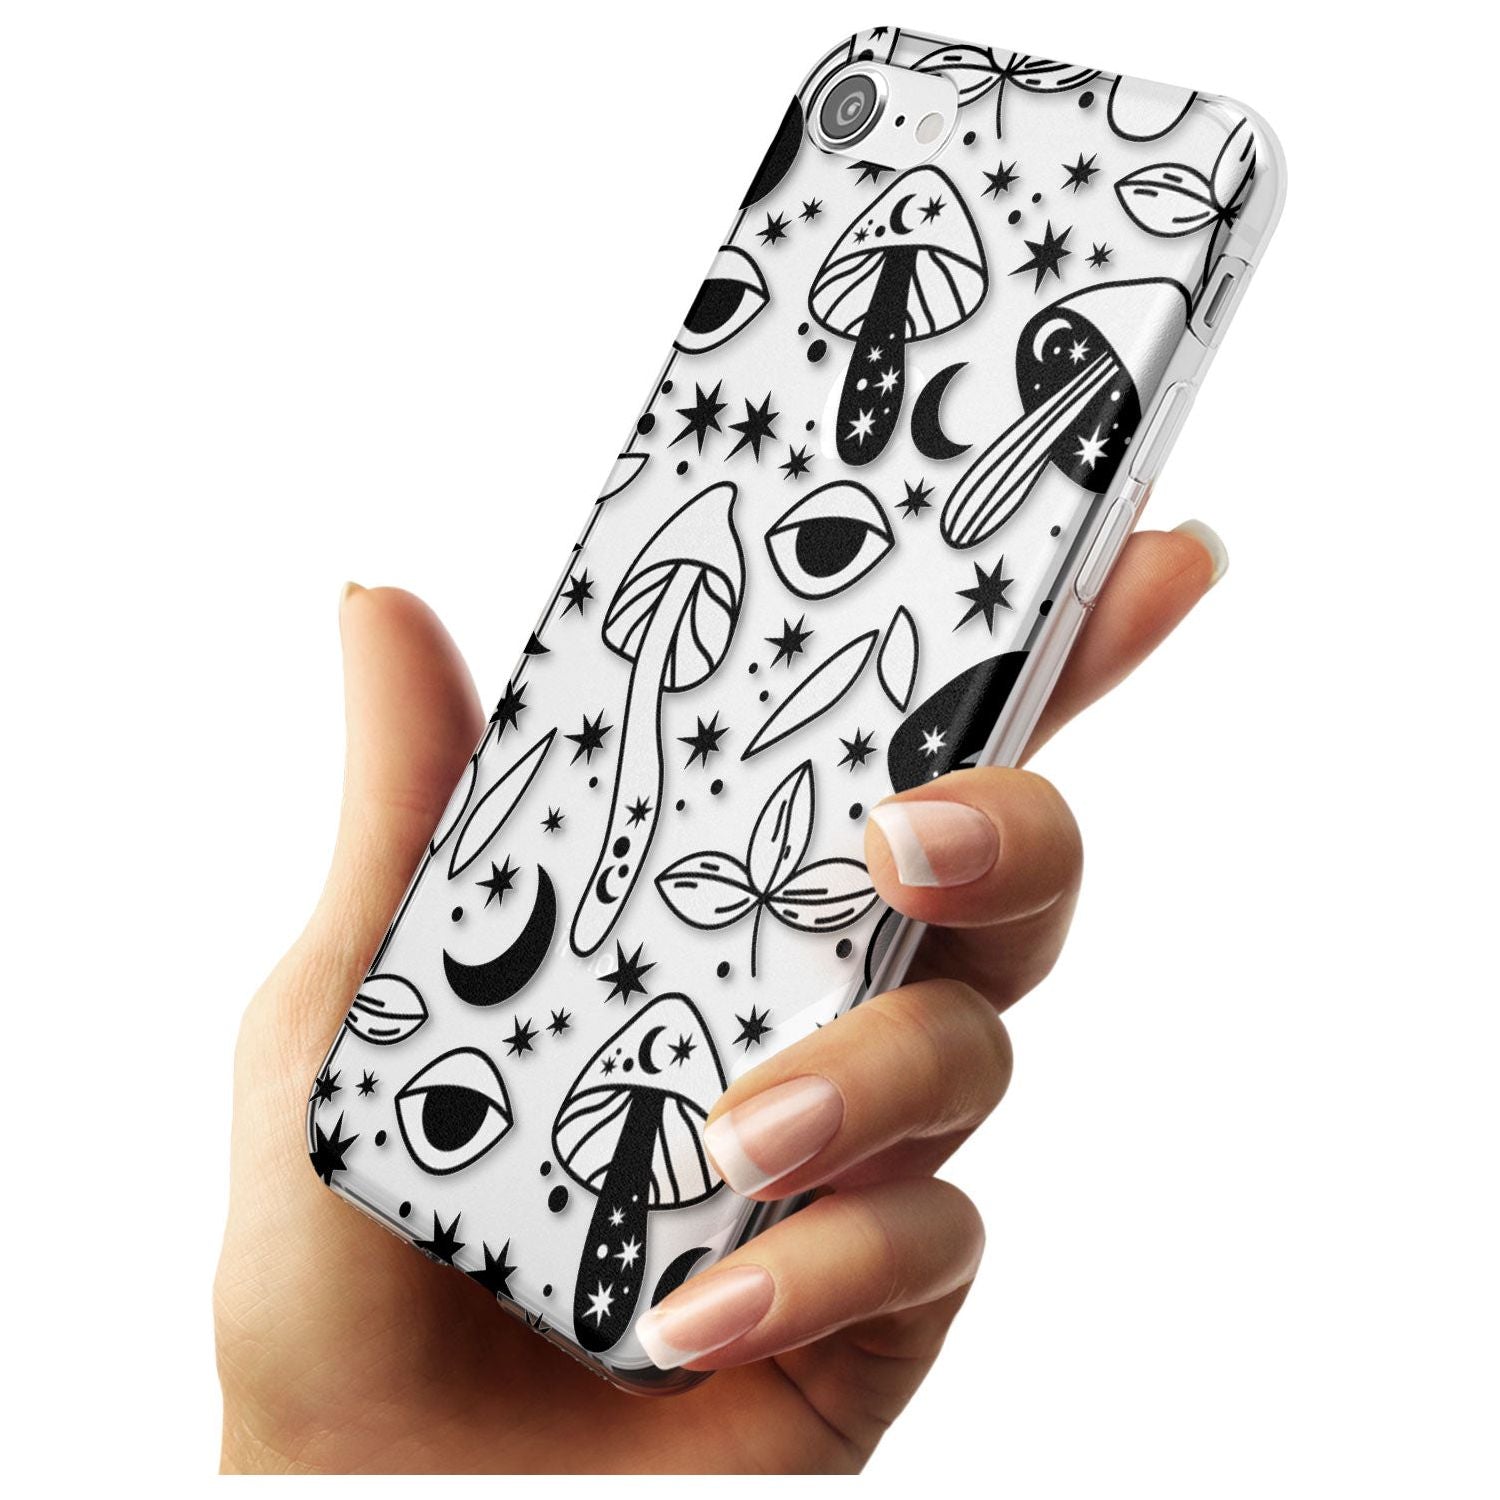 Psychedelic Mushrooms Pattern Slim TPU Phone Case for iPhone SE 8 7 Plus